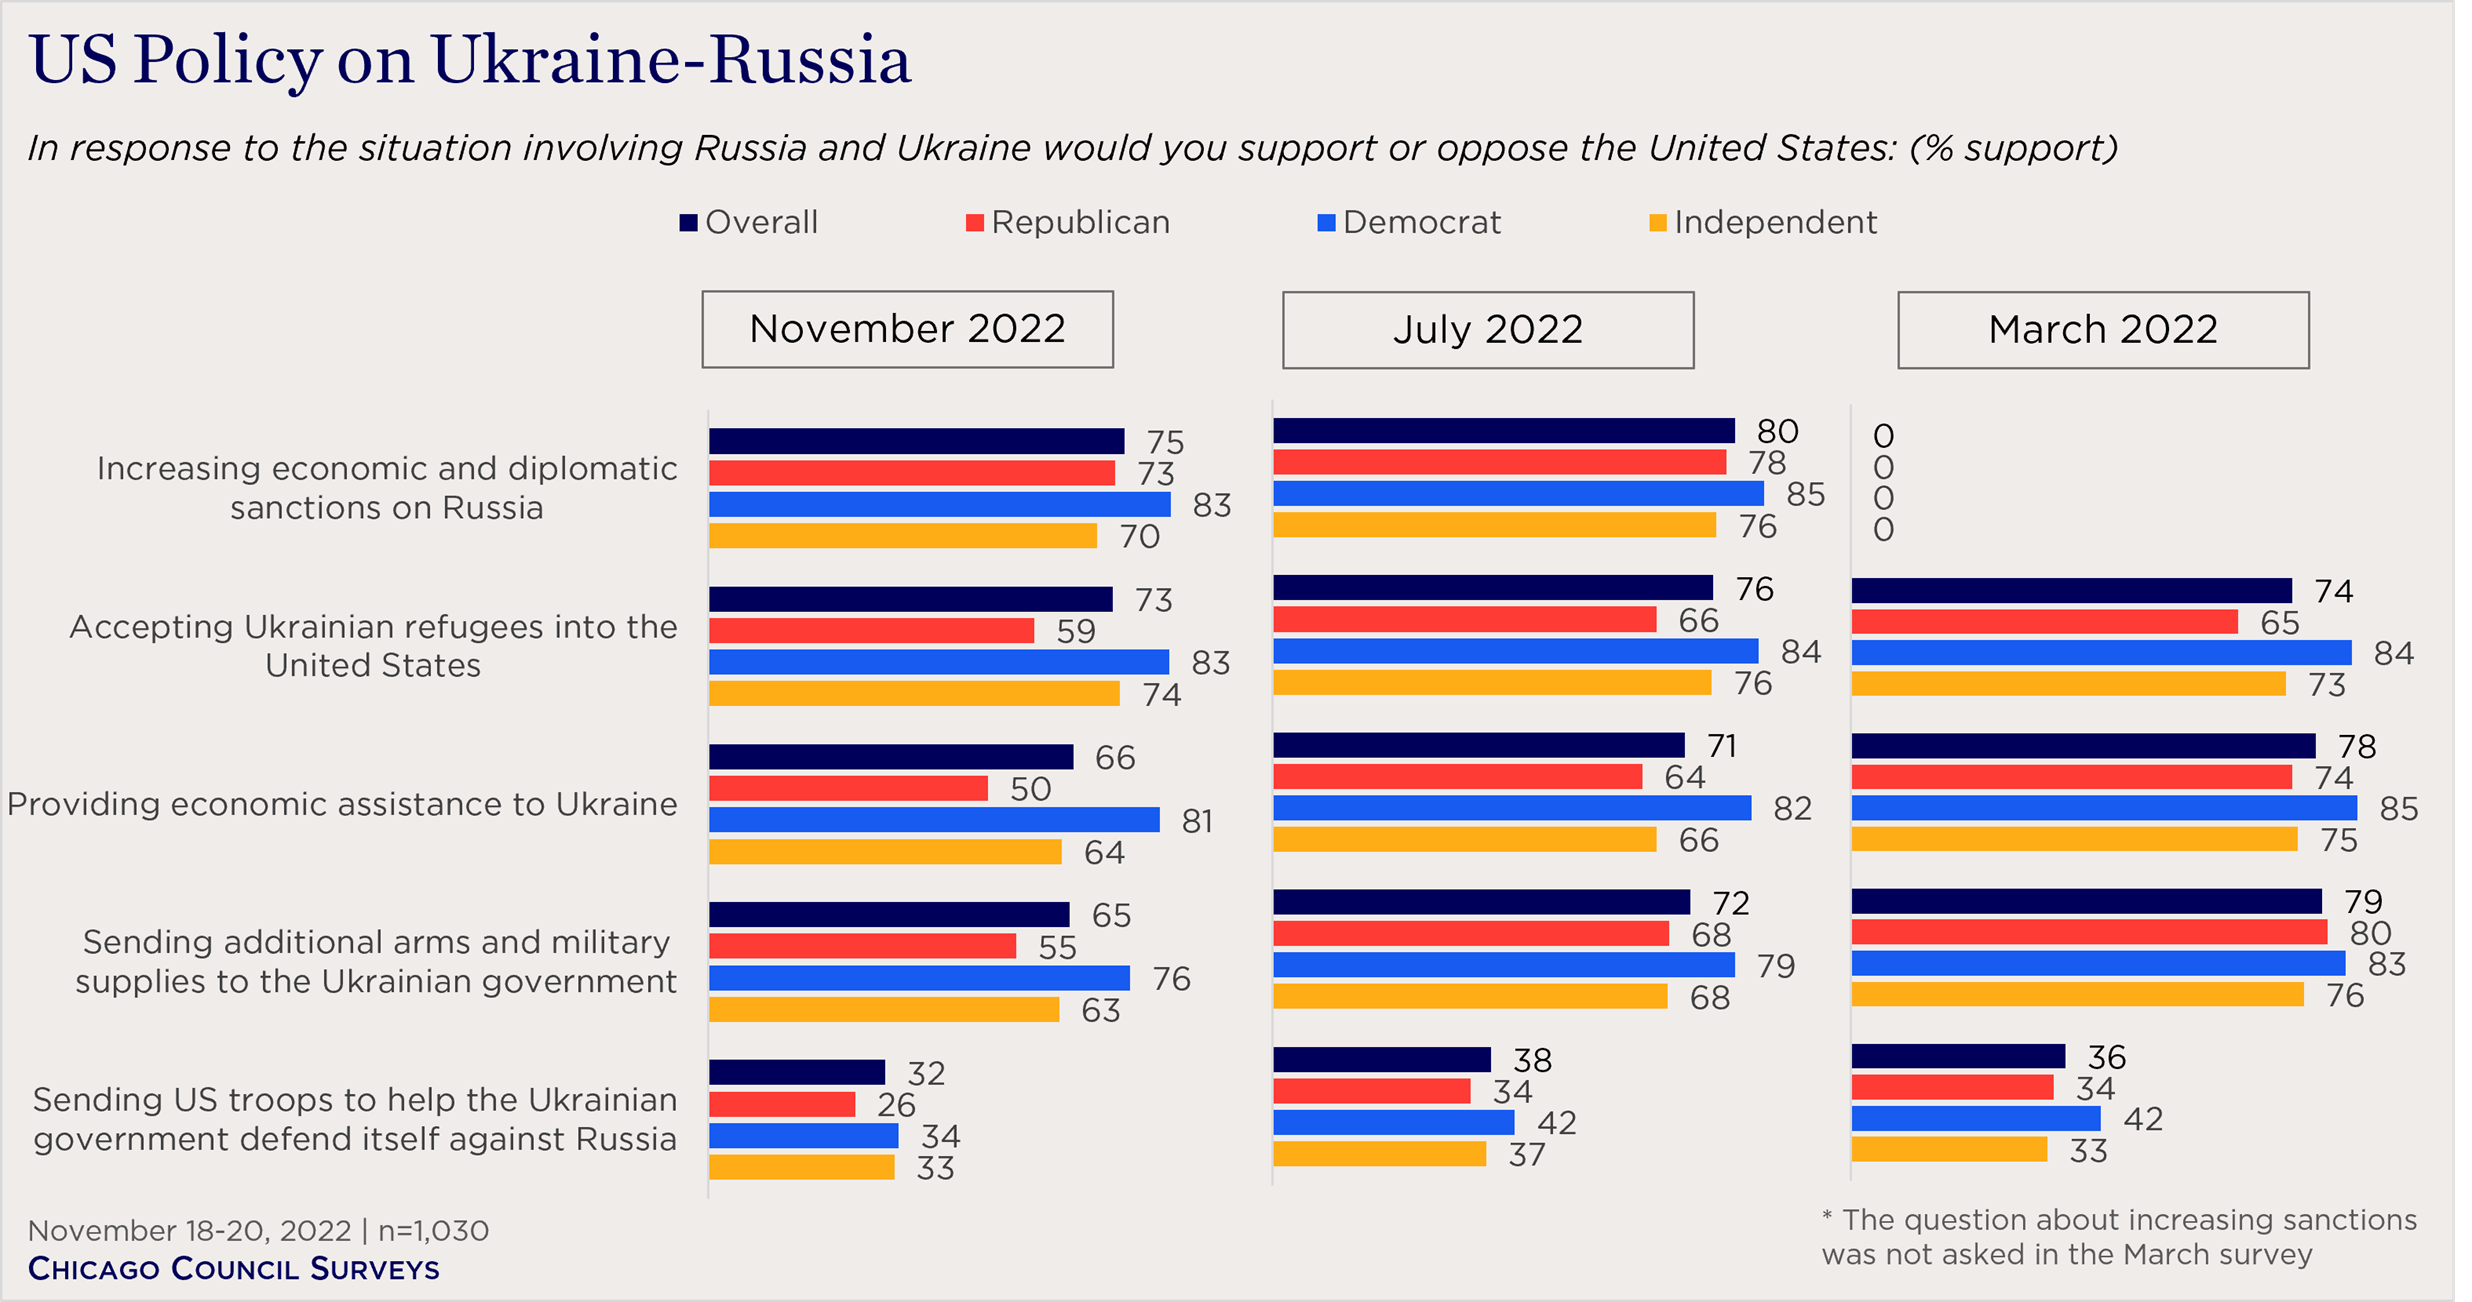 "bar charts showing views on US policy on Ukraine-Russia over time"